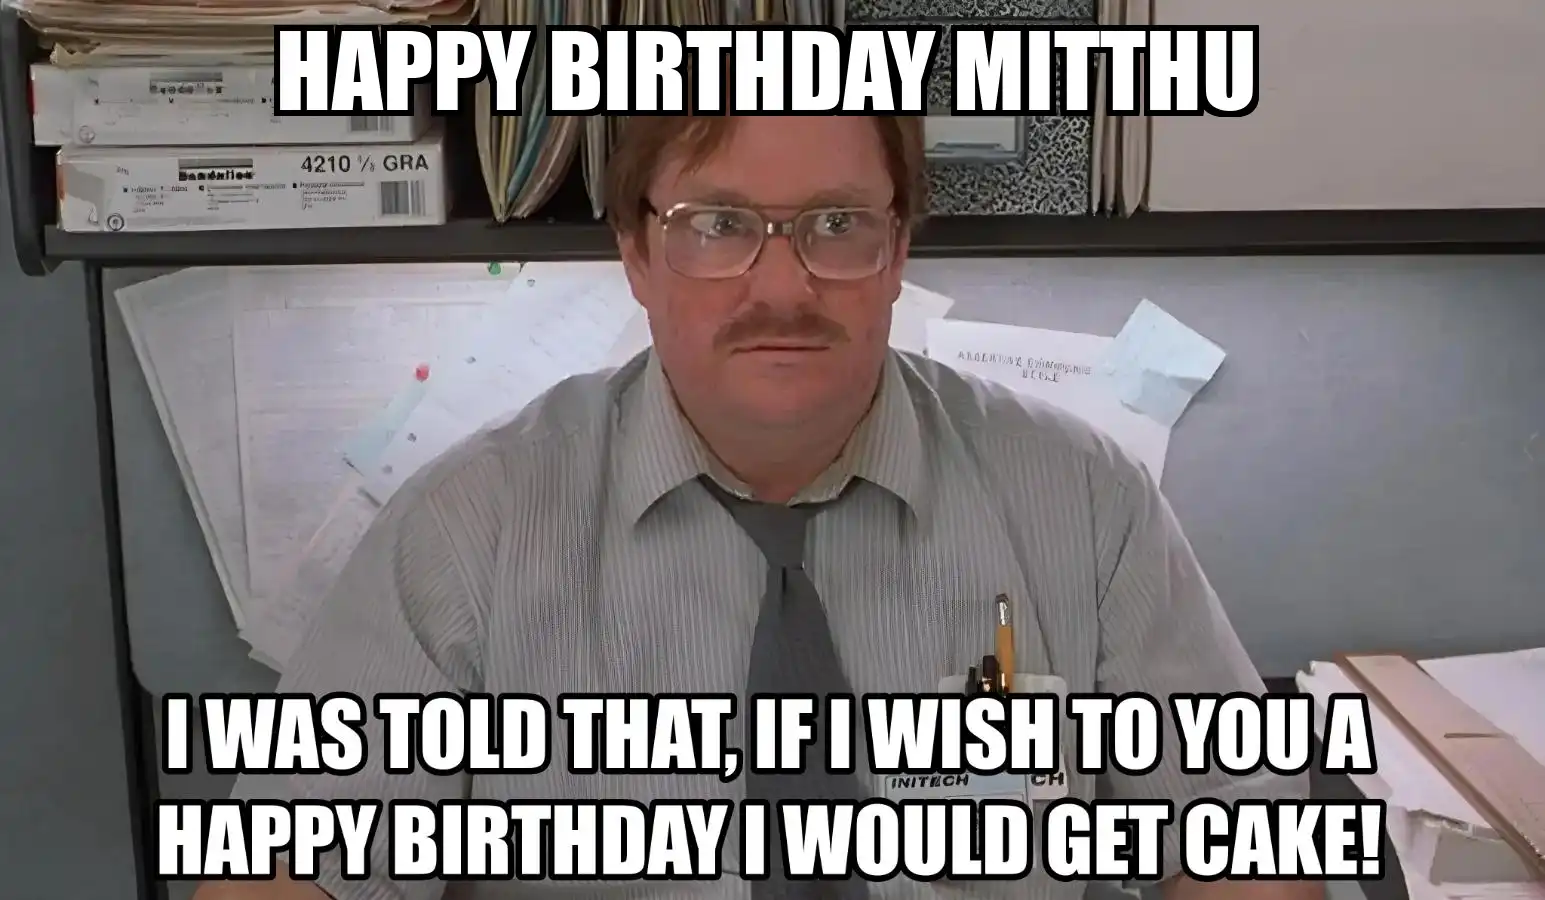 Happy Birthday Mitthu I Would Get A Cake Meme